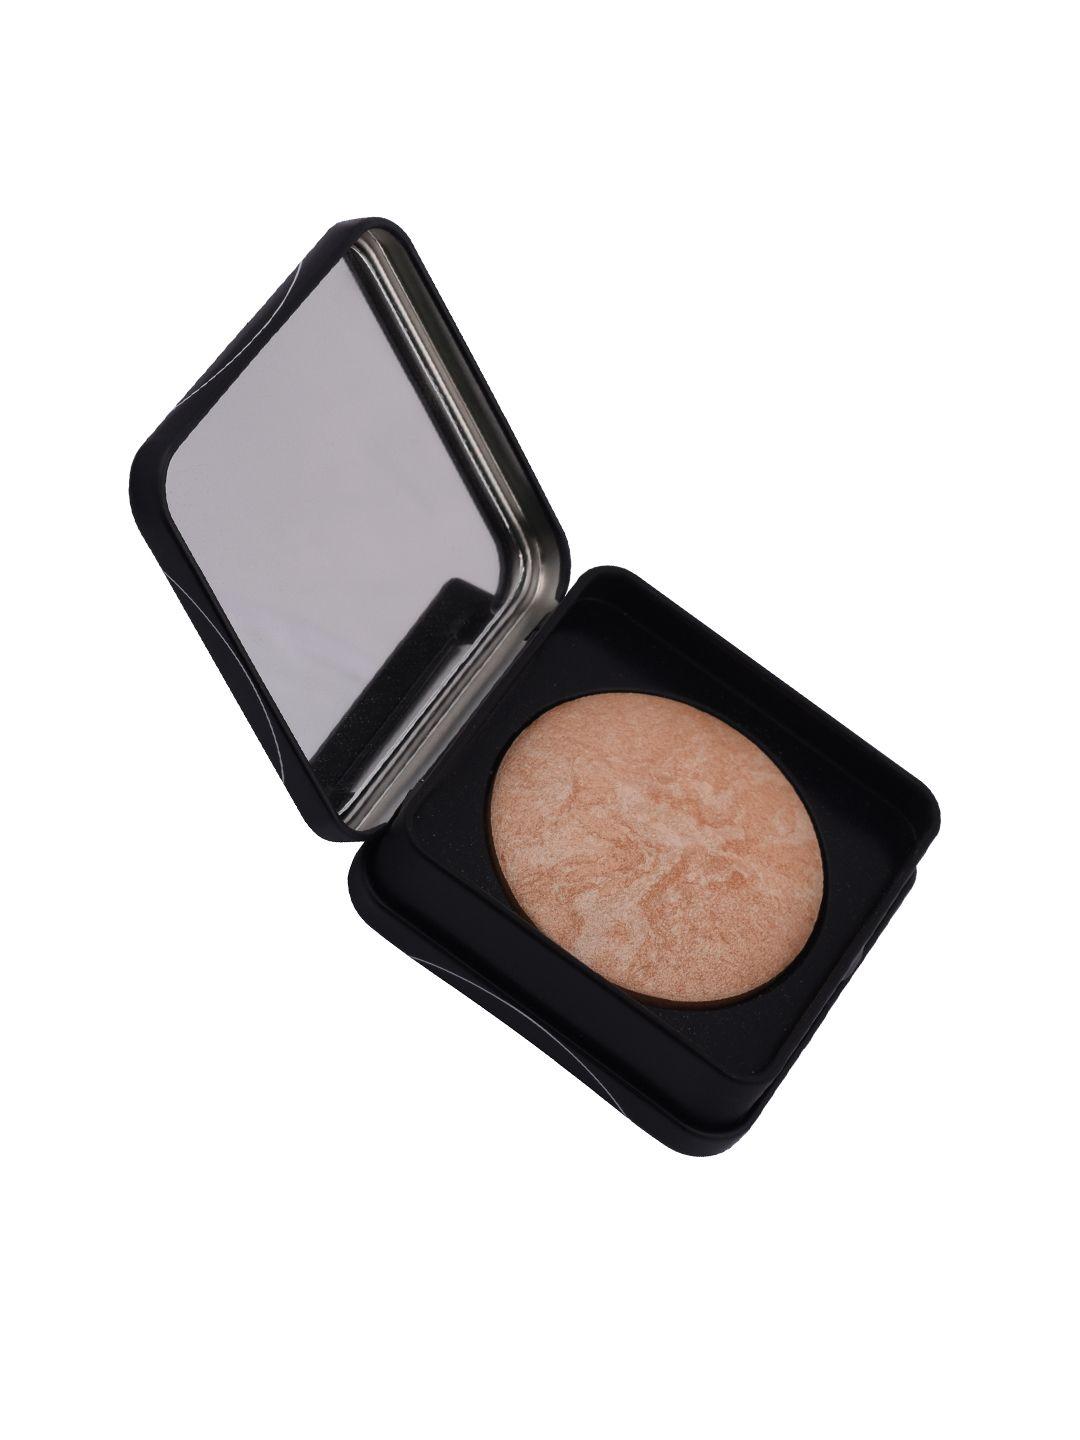 pac 02 iconic baked highlighter 7.5g